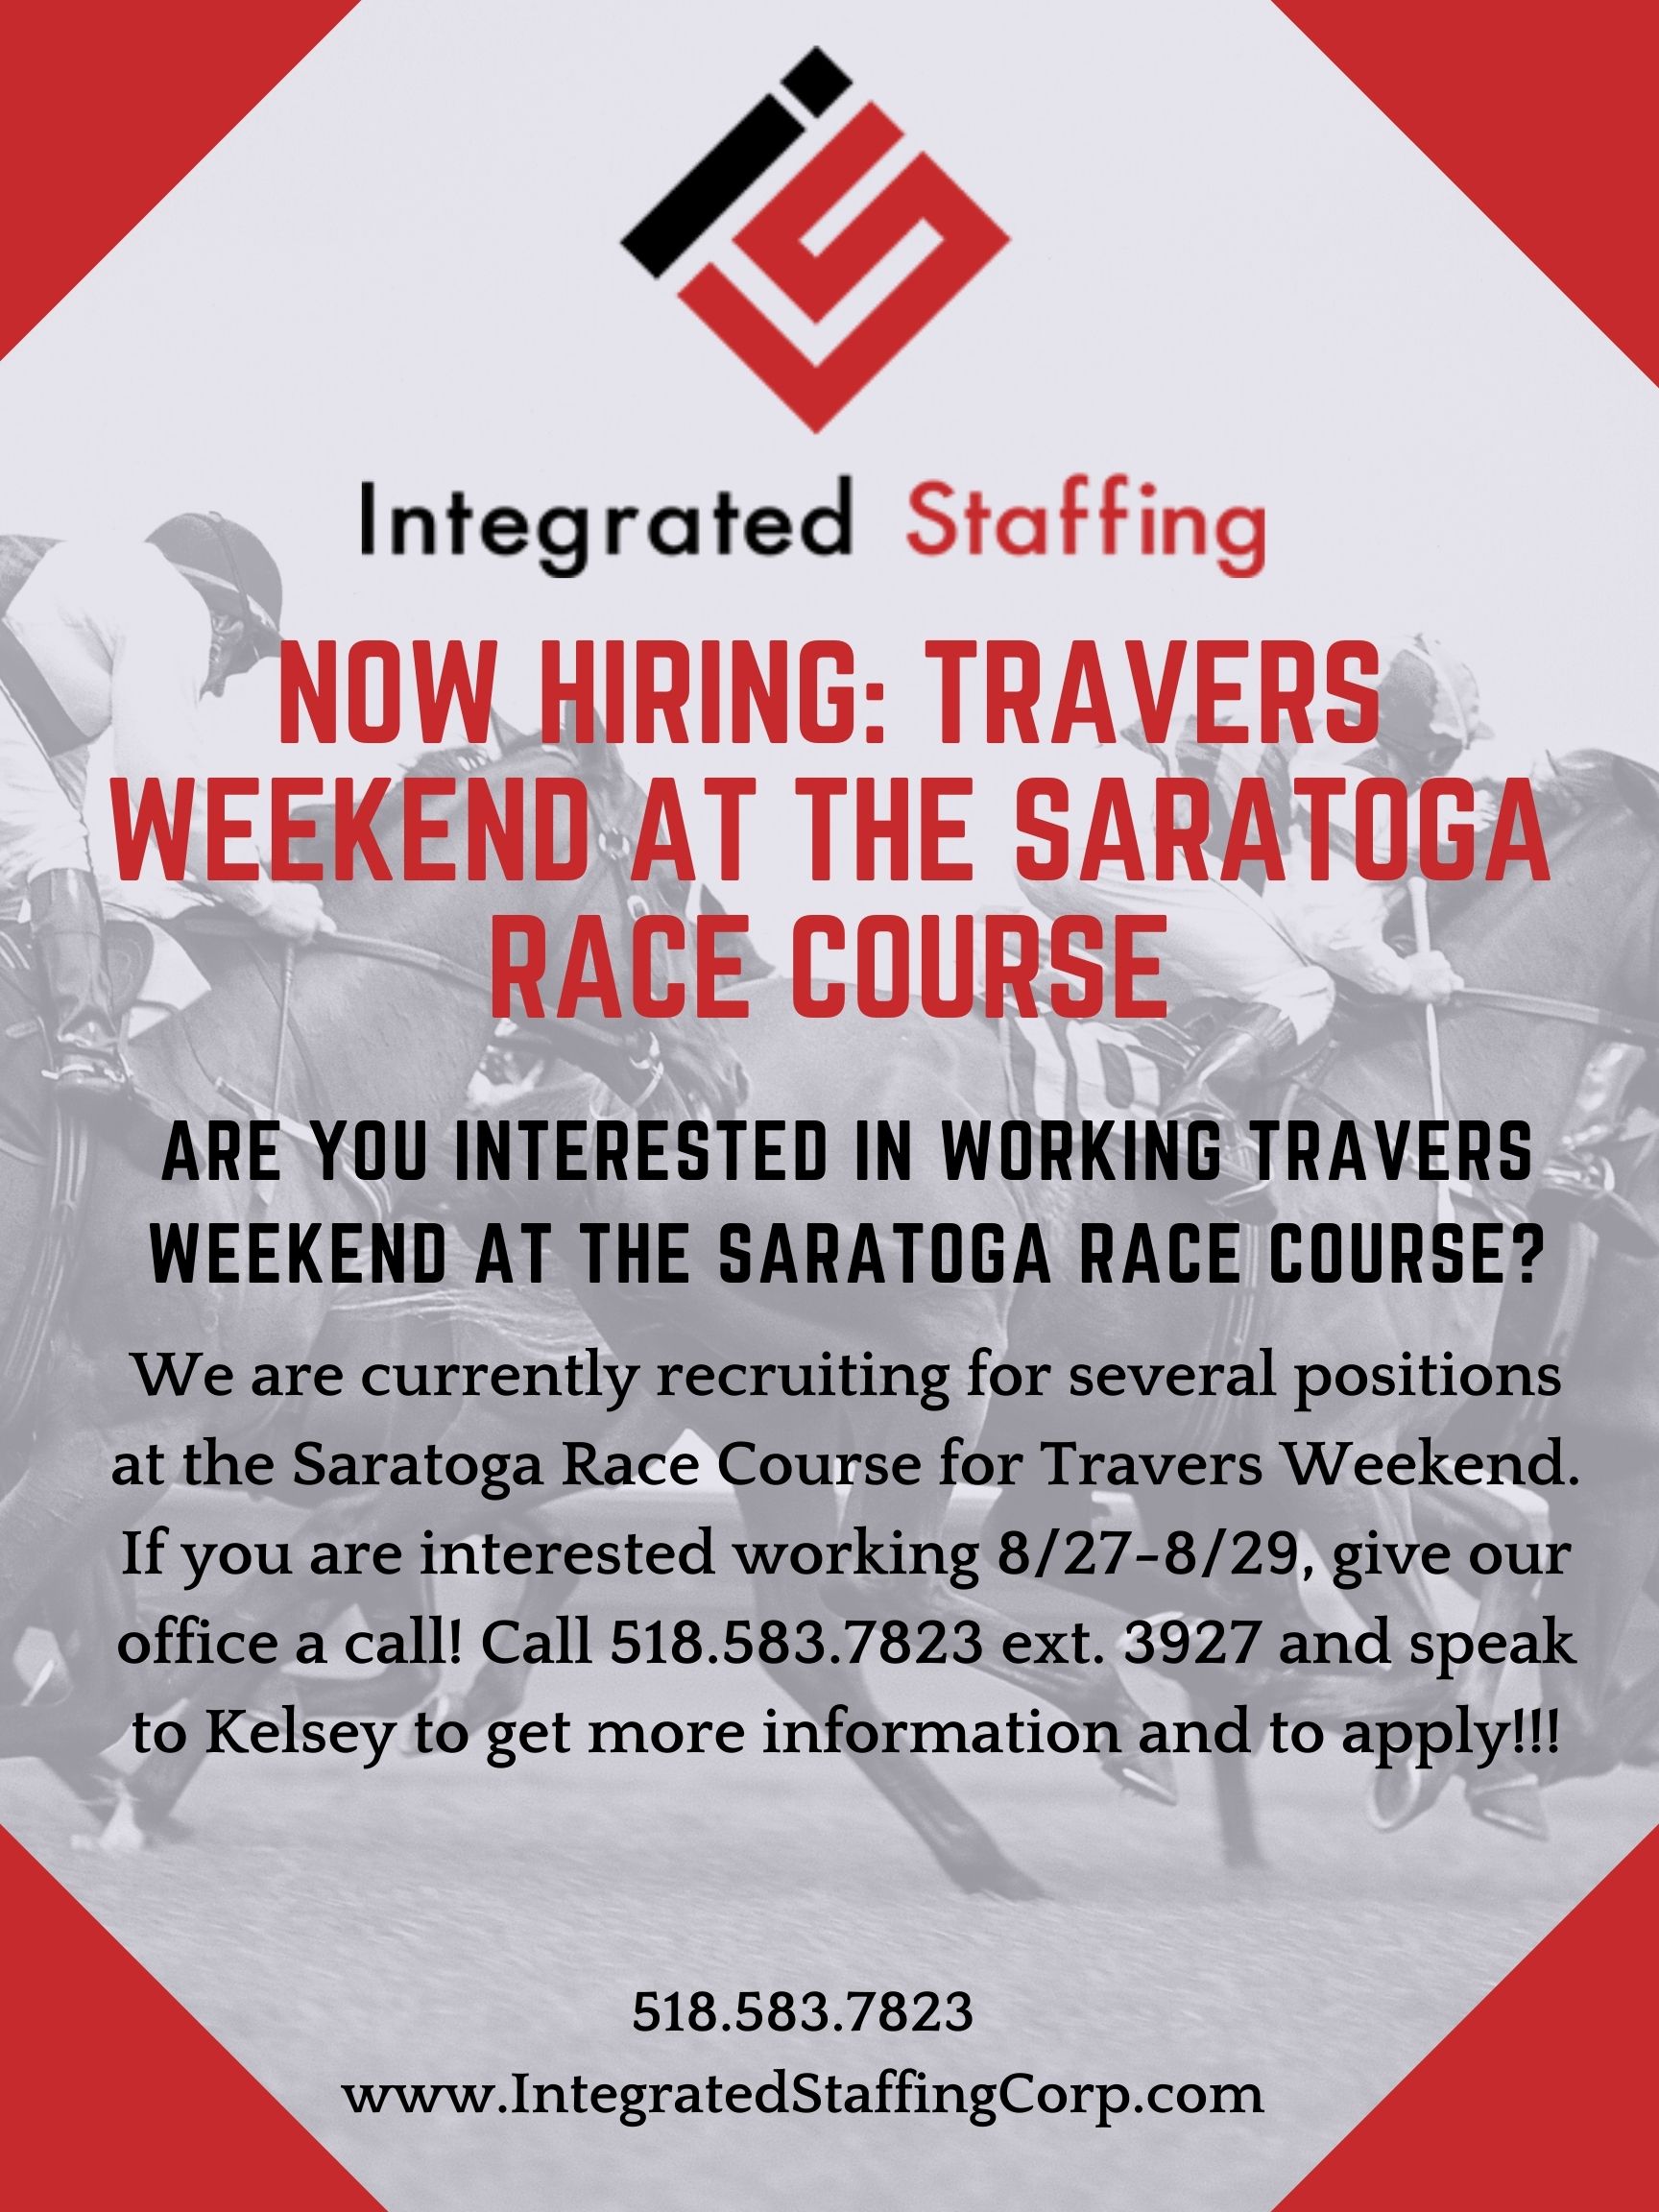 Come work the Travers Weekend at Saratoga Race Course! Integrated